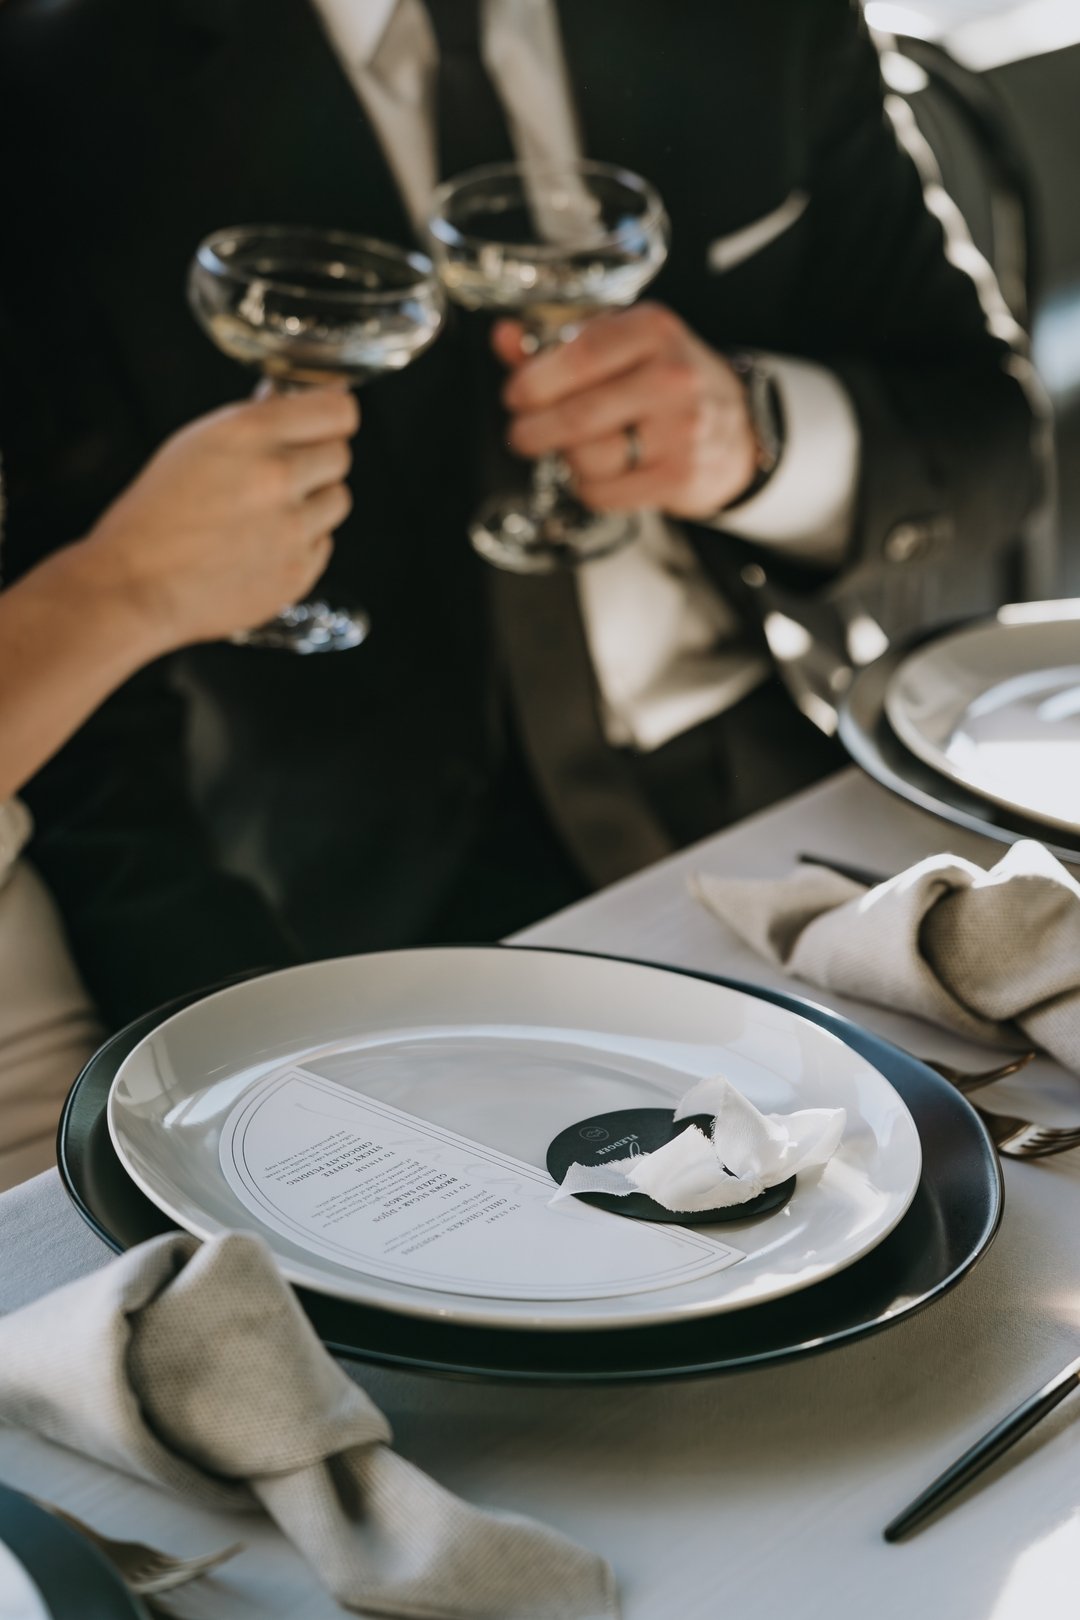 Experience exceptional service, beautiful presentation, and attention to detail. Our team and our vendors are always working hard to bring your event to life, making every moment enjoyable and memorable for you and your guests.
.
. 
#yeg #yegevents #